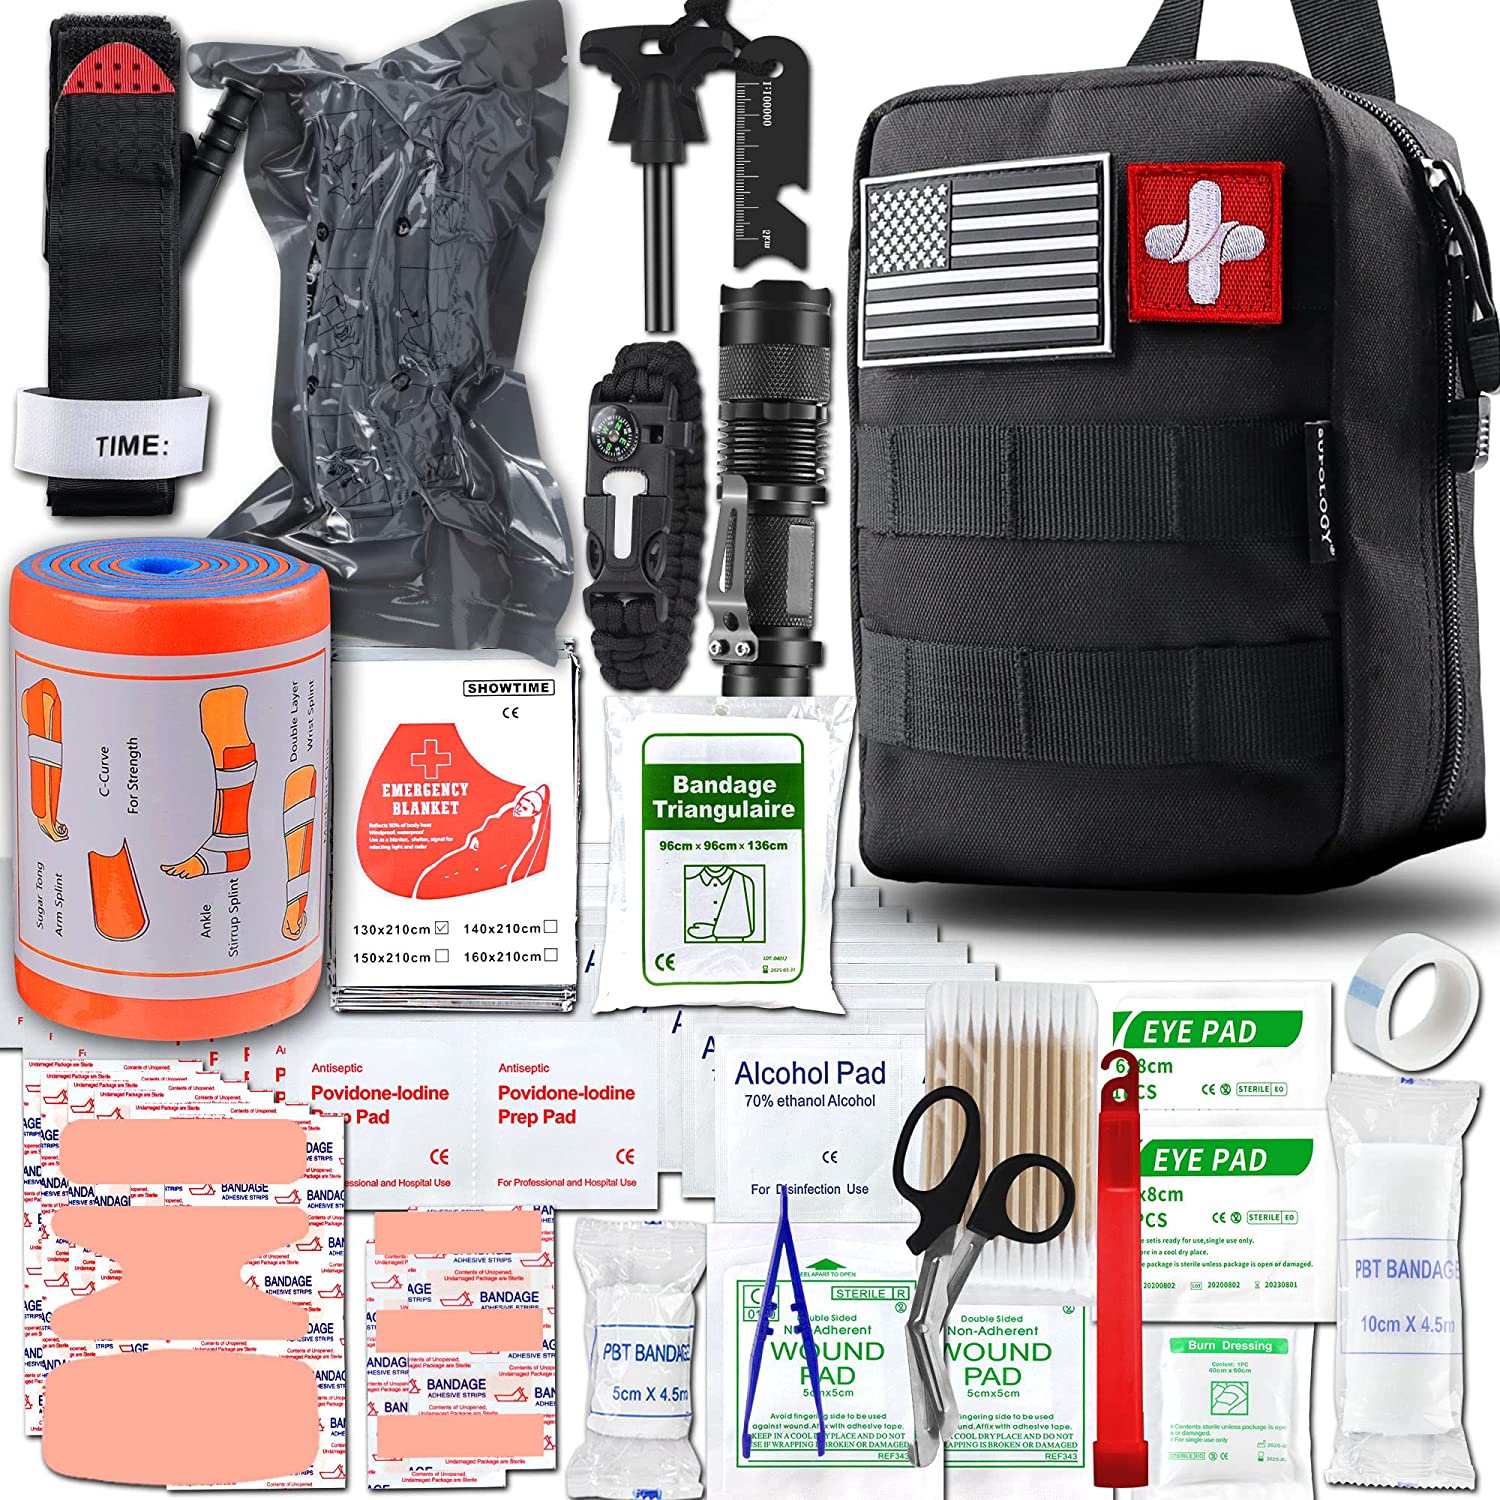 SUPOLOGY Emergency Survival First Aid Kit,135-In-1 Trauma Kit with Tourniquet 36" Splint, Military Combat Tactical IFAK EMT for First Aid Response, Disaster Home Camping Emergency(Upgraded Bag)